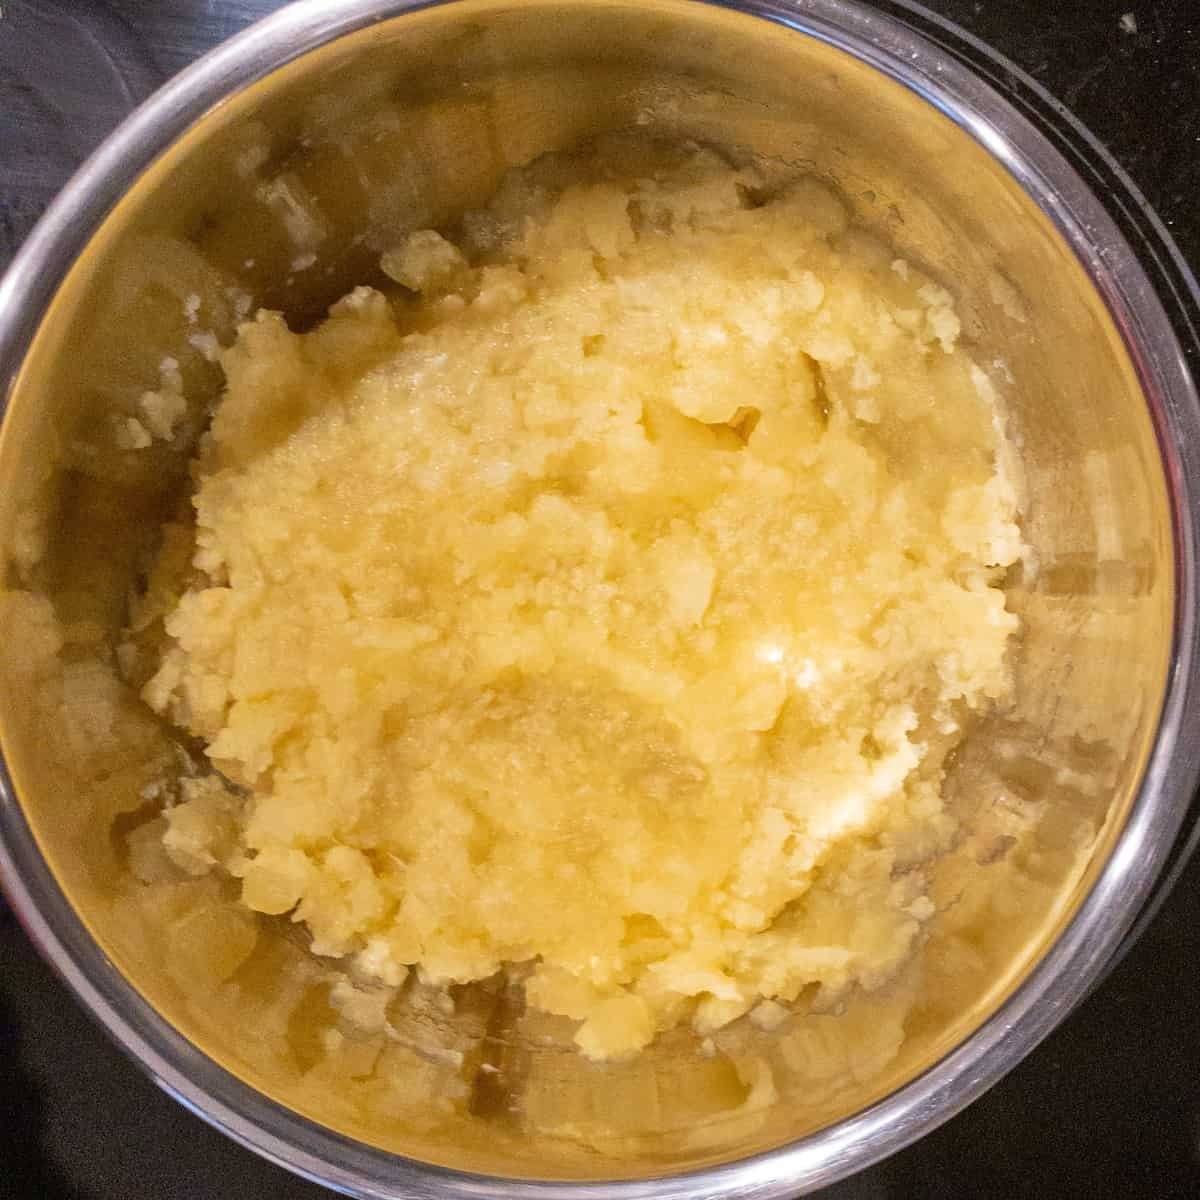 Close up showing potatoes and cauliflower mashed after being boiled